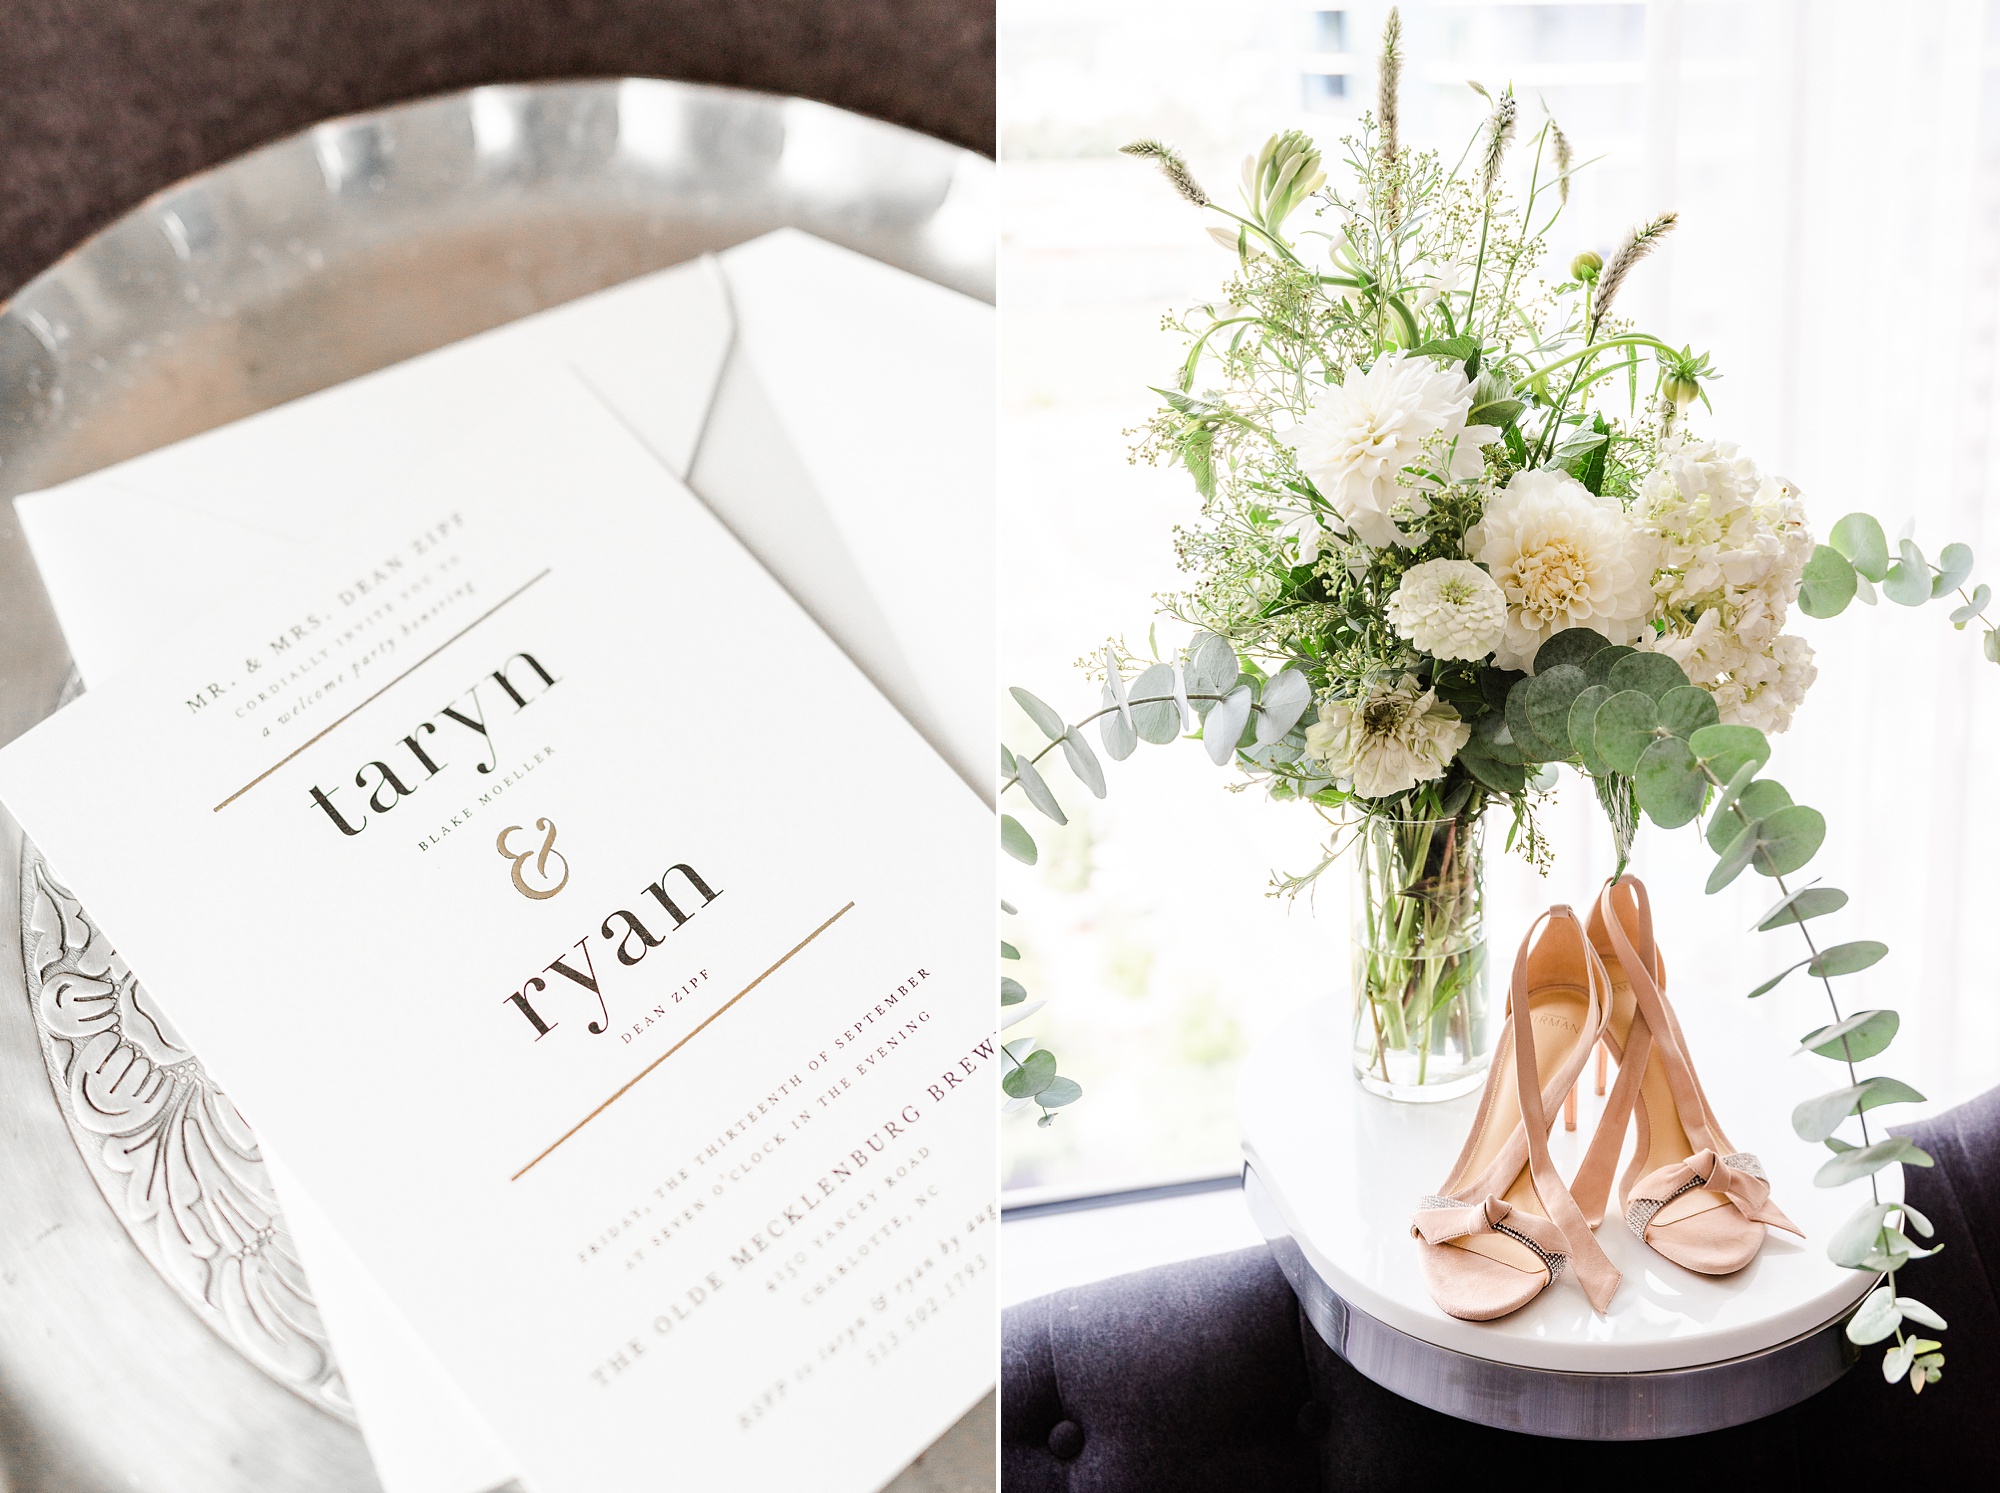 details for Uptown Charlotte wedding day